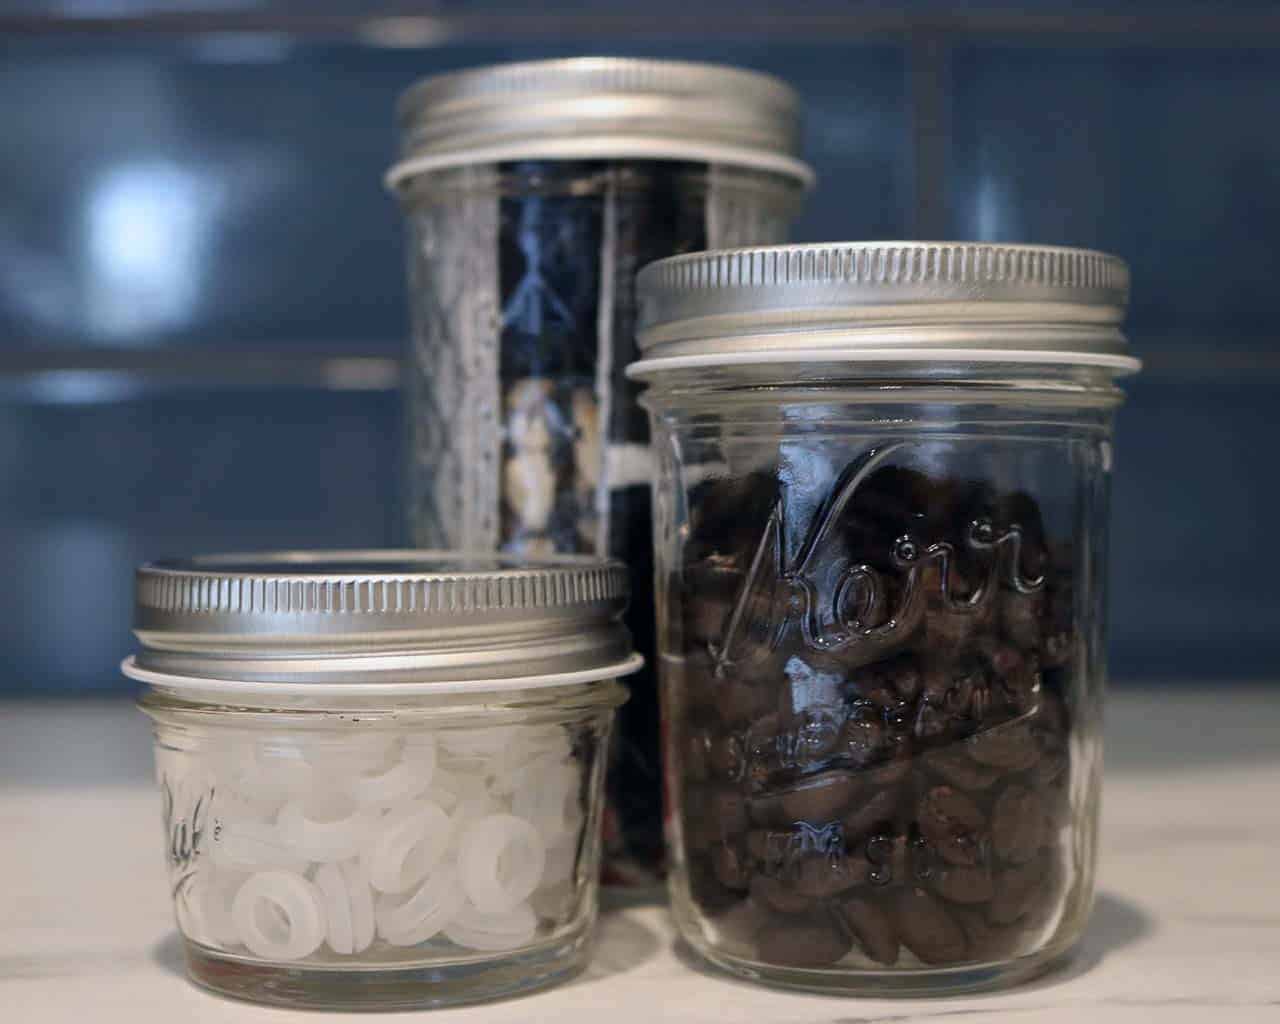 Shiny silver storage lids on 4oz, half pint, and 12oz Ball and Kerr Mason jars with coffee beans and grommets